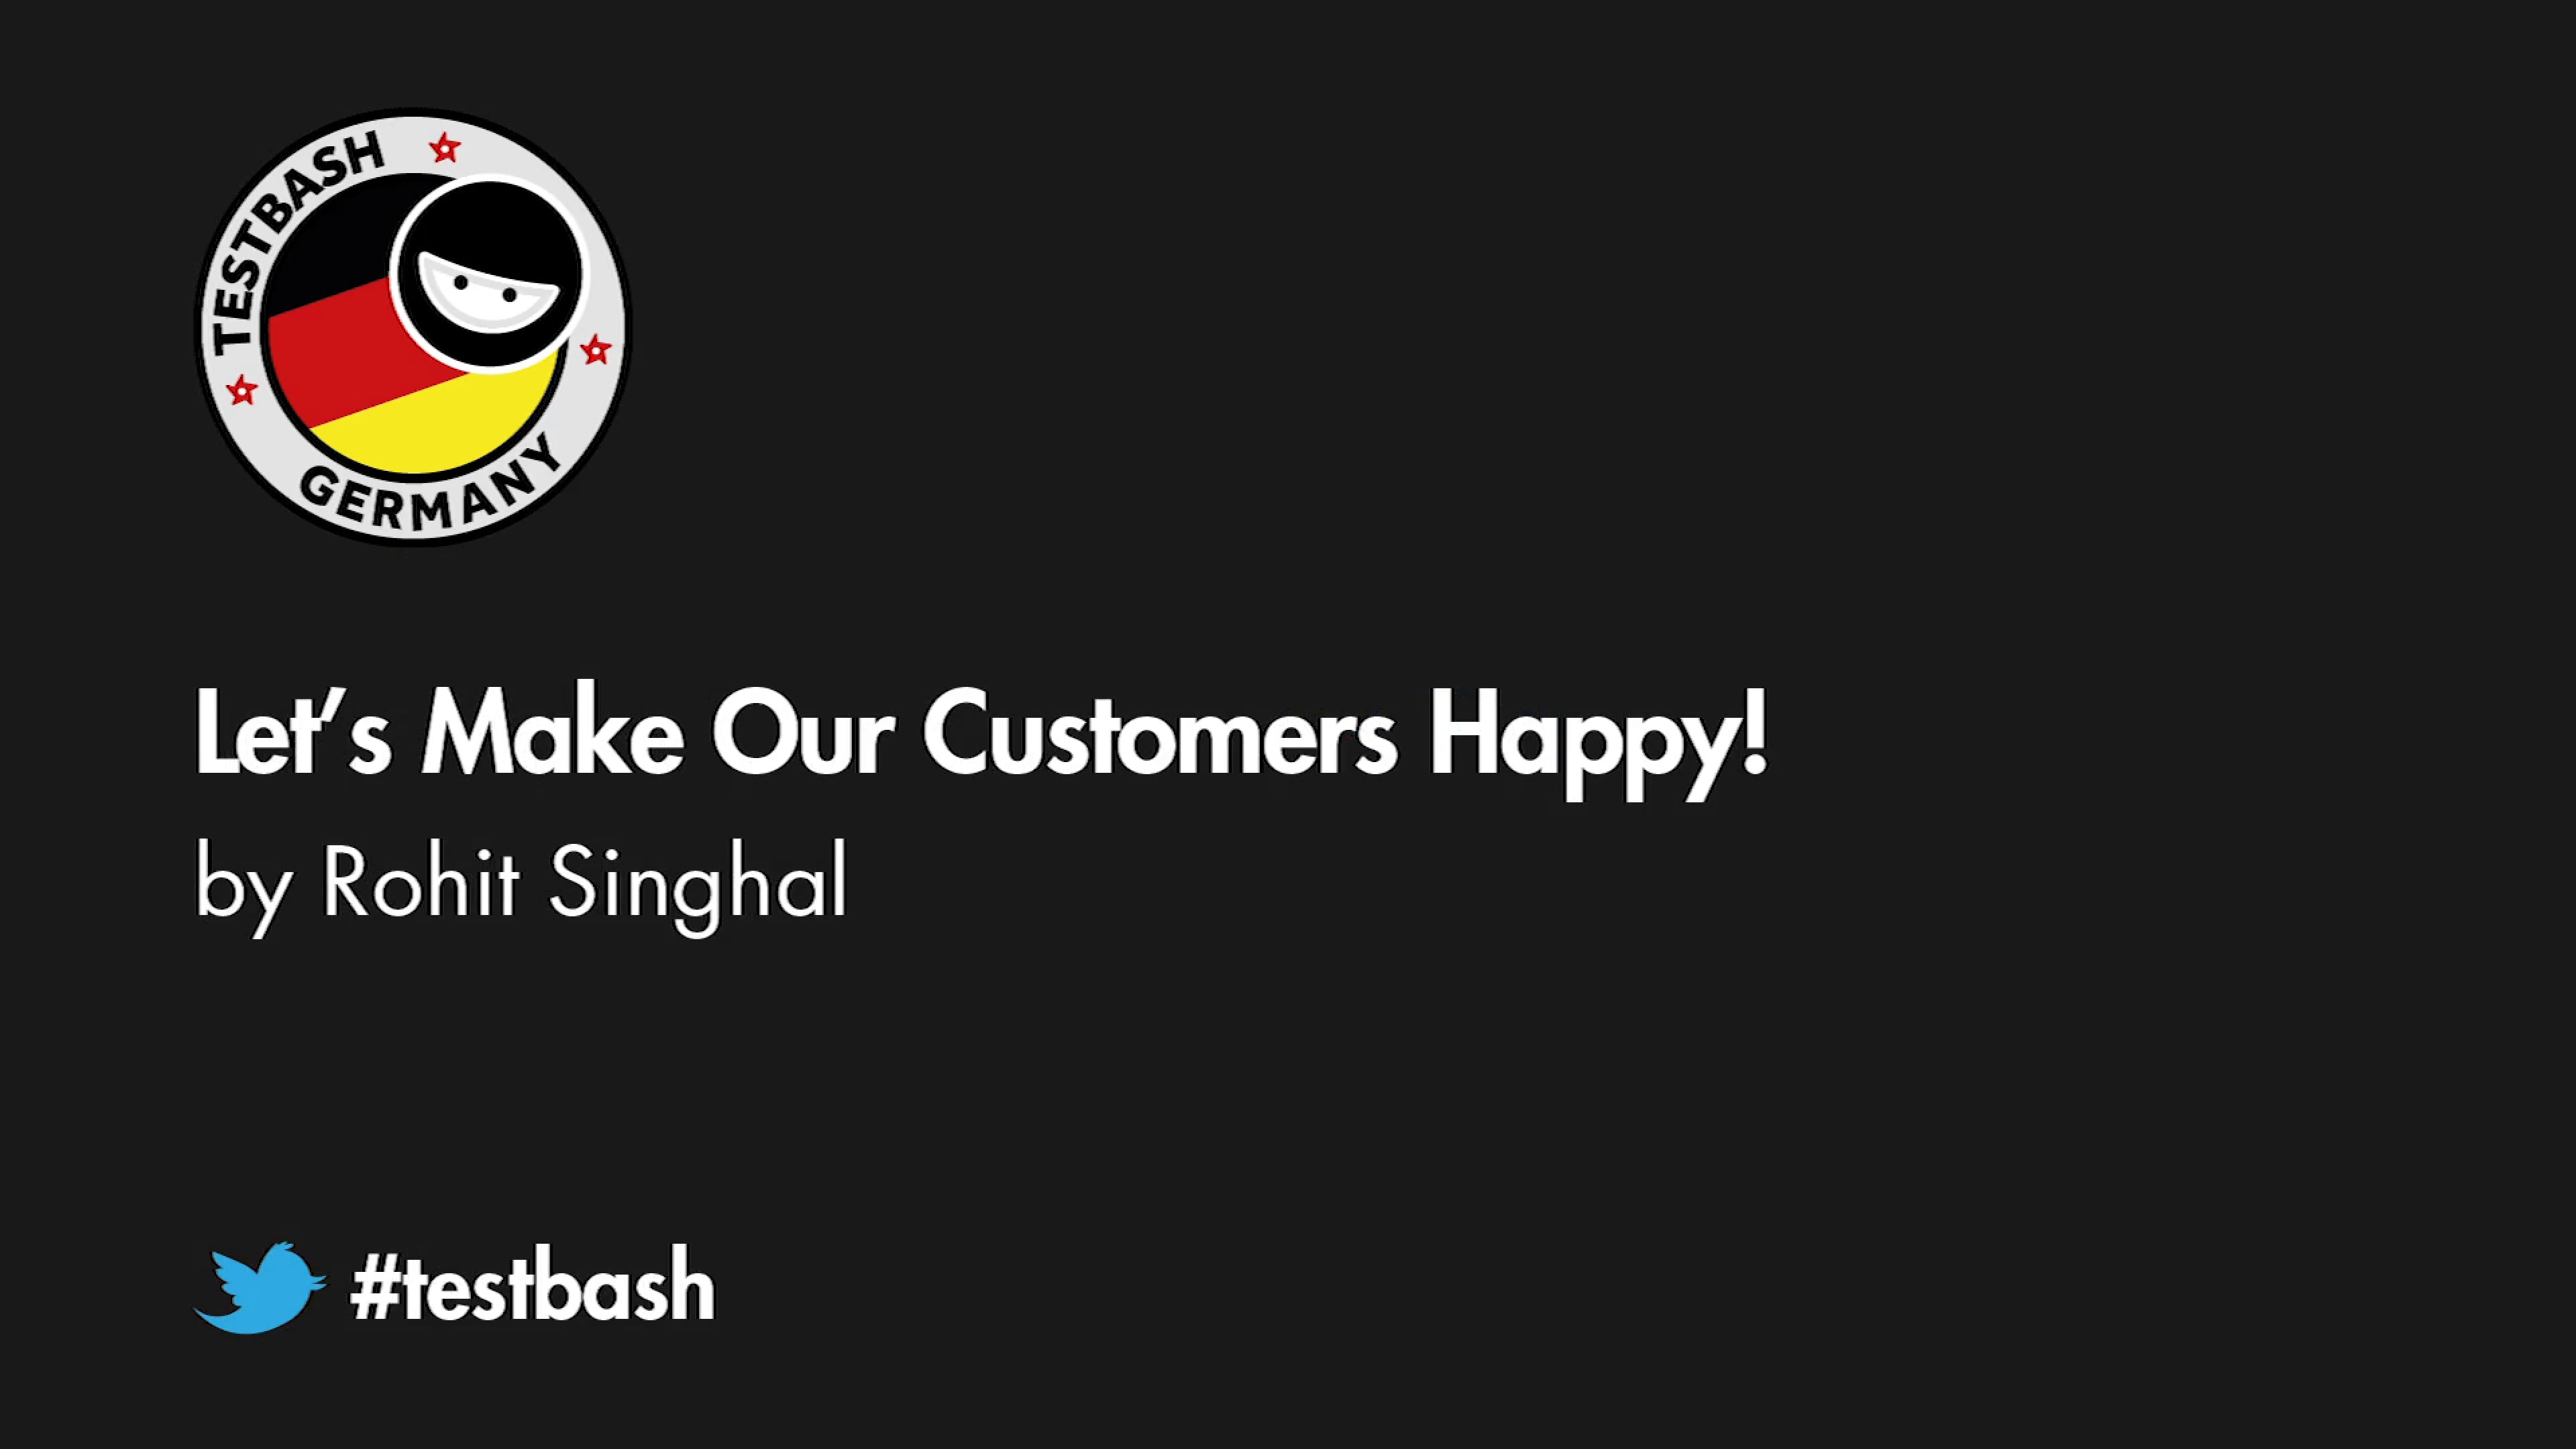 Let's Make Our Customers Happy! - Rohit Singhal